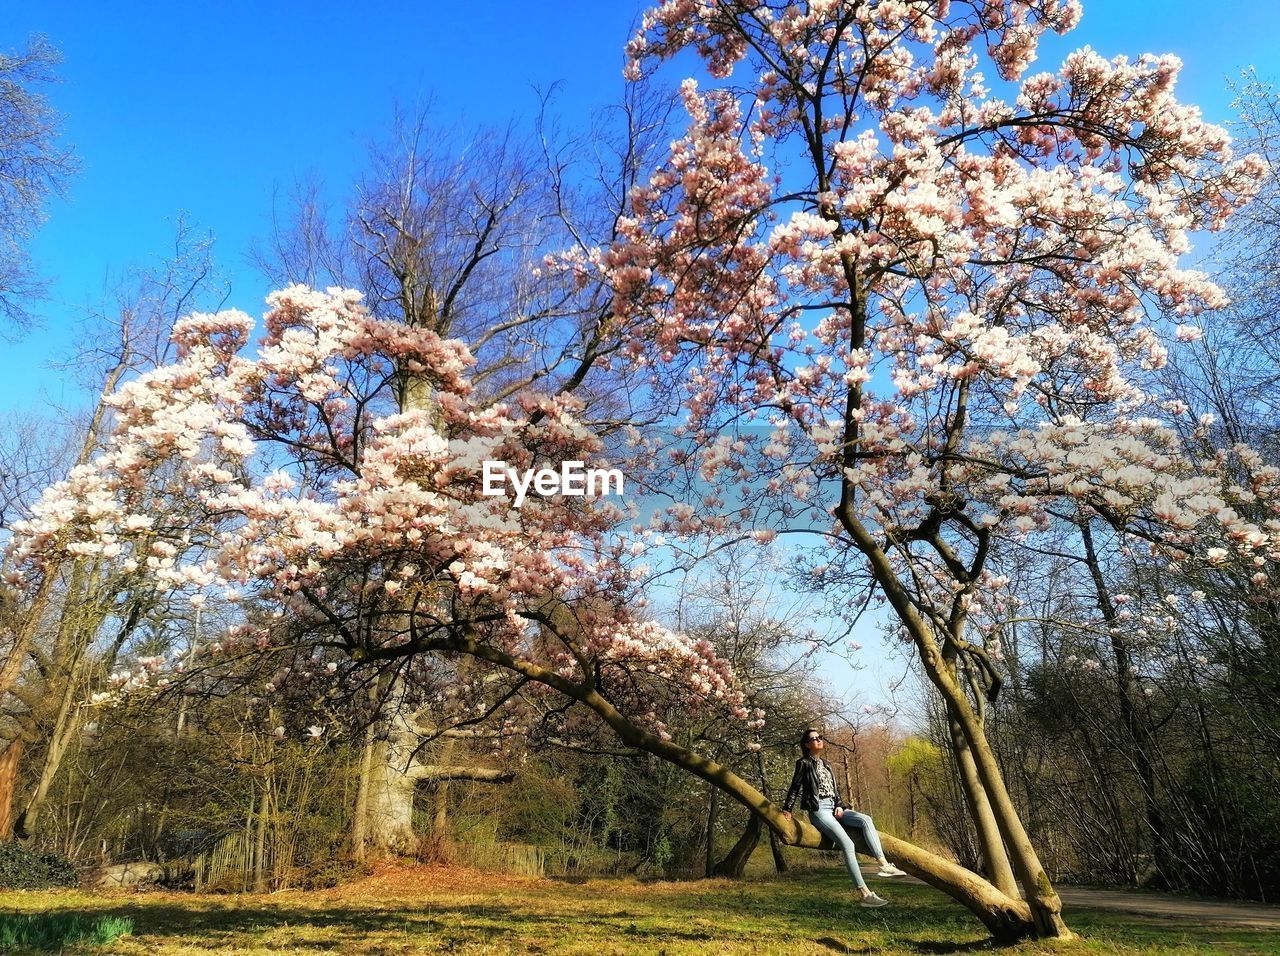 plant, tree, flower, nature, sky, beauty in nature, blossom, growth, day, springtime, branch, spring, cherry blossom, grass, sunlight, clear sky, no people, tranquility, outdoors, flowering plant, scenics - nature, landscape, field, park, land, leaf, autumn, blue, tranquil scene, park - man made space, freshness, sunny, low angle view